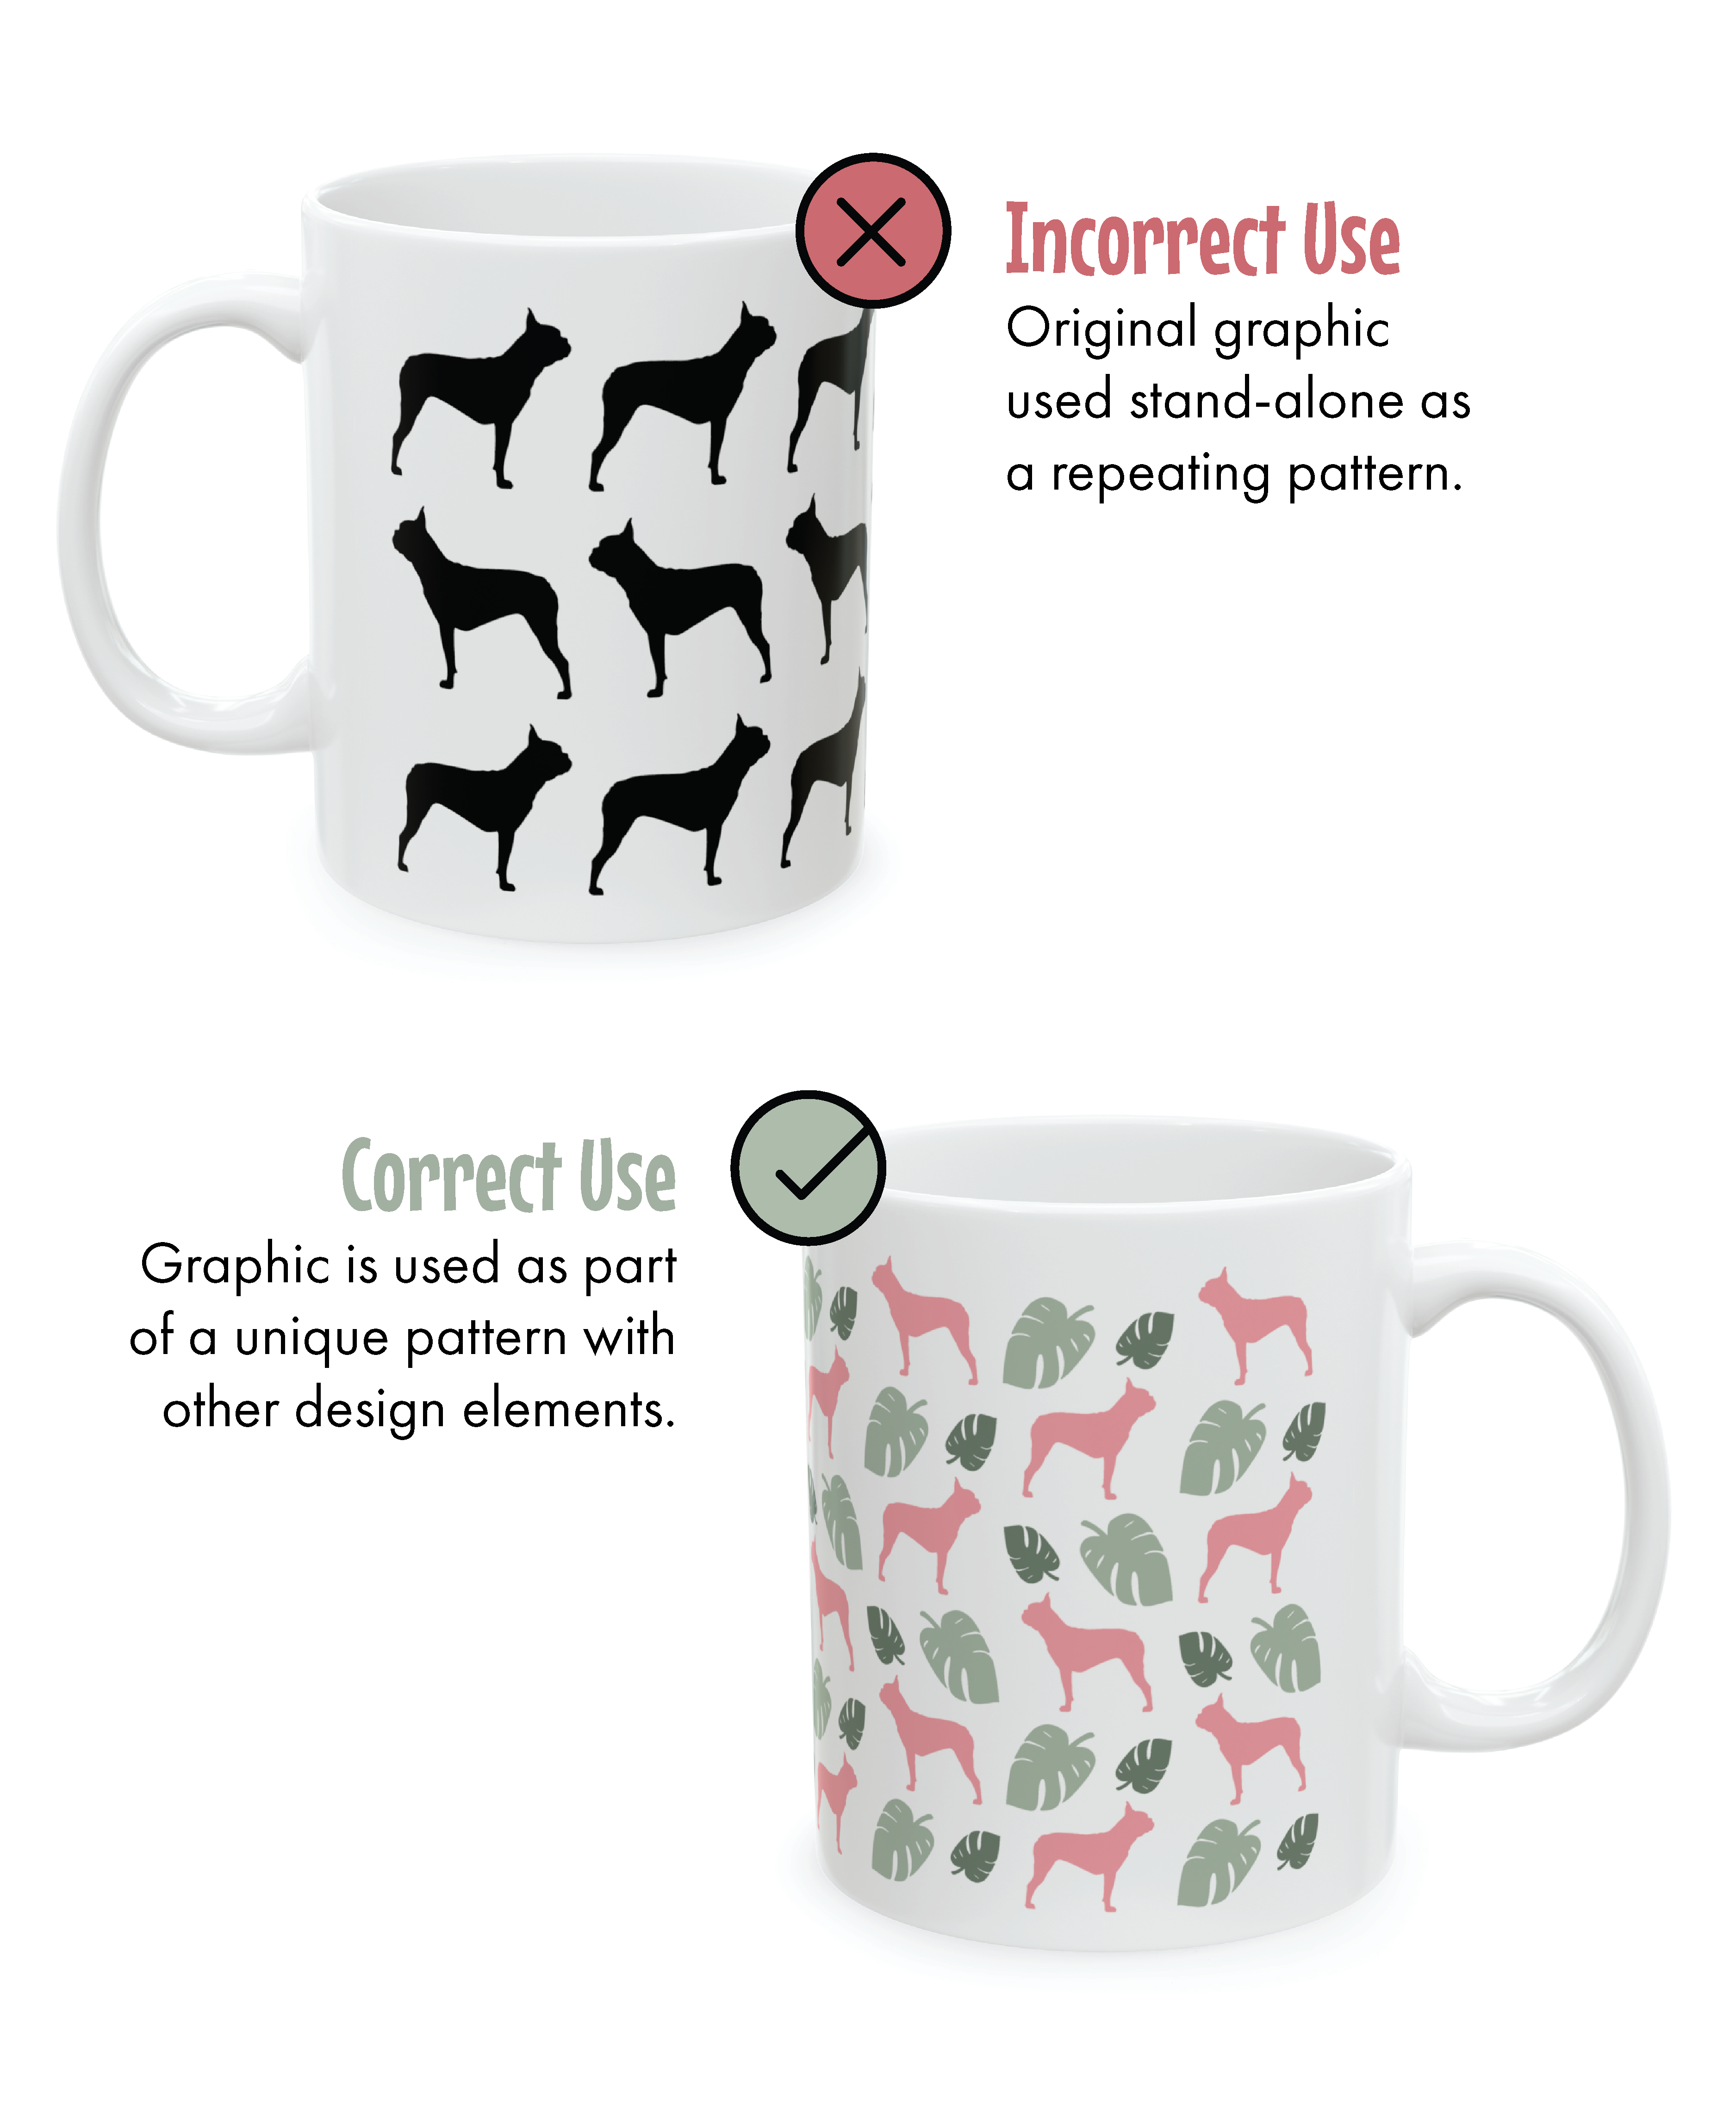 Incorrect use - Original dog silhouette is used stand-alone as a repeating pattern on a mug. Correct use - Dog silhouette is incorporated with other design elements to create a unique pattern on a mug. 